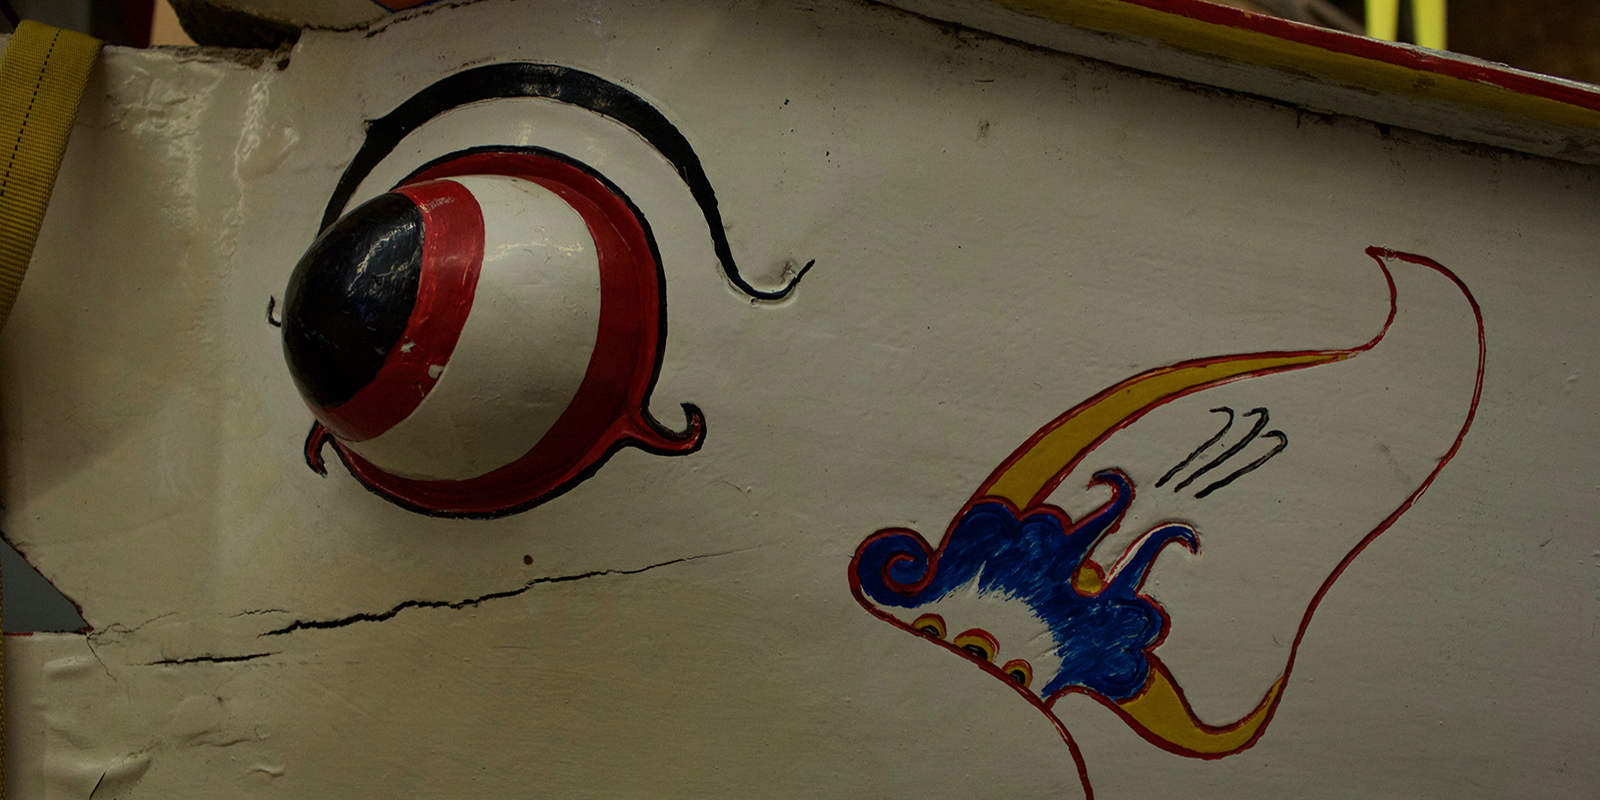 A close up view of the painted eyeball and earings on the boat